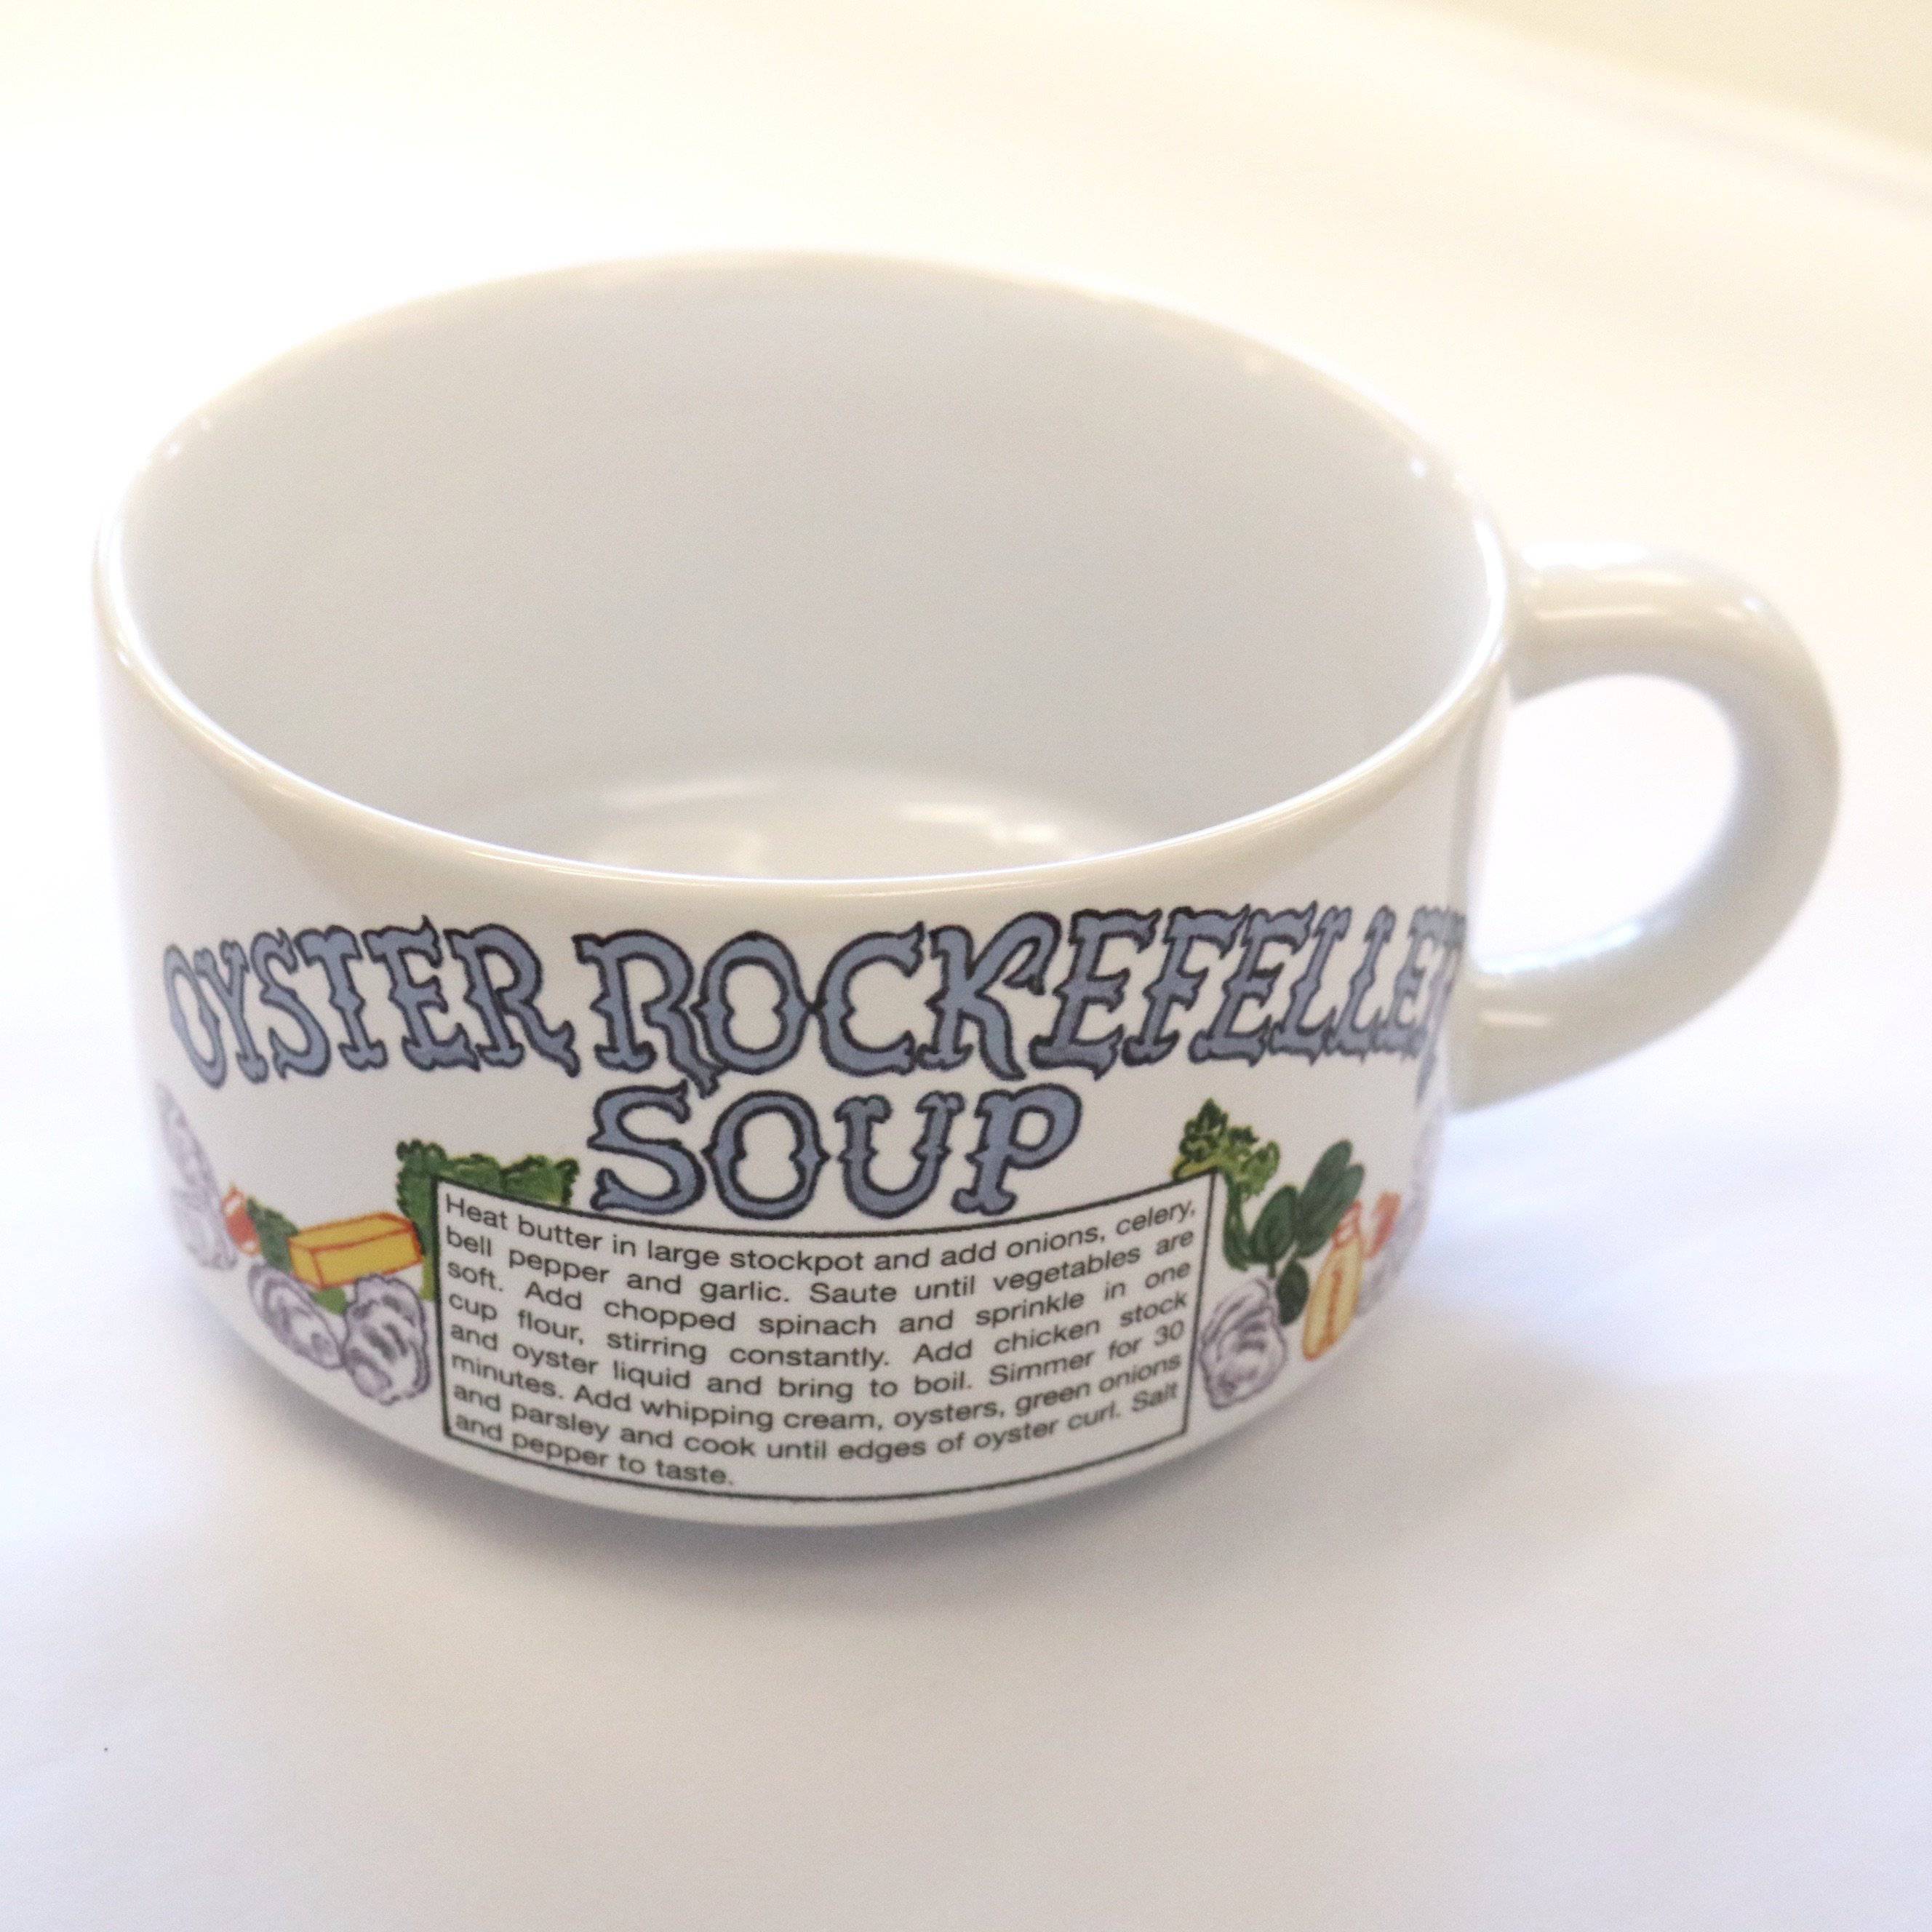 Youngberg & Co - Recipe Gumbo Bowls - Little Miss Muffin Children & Home